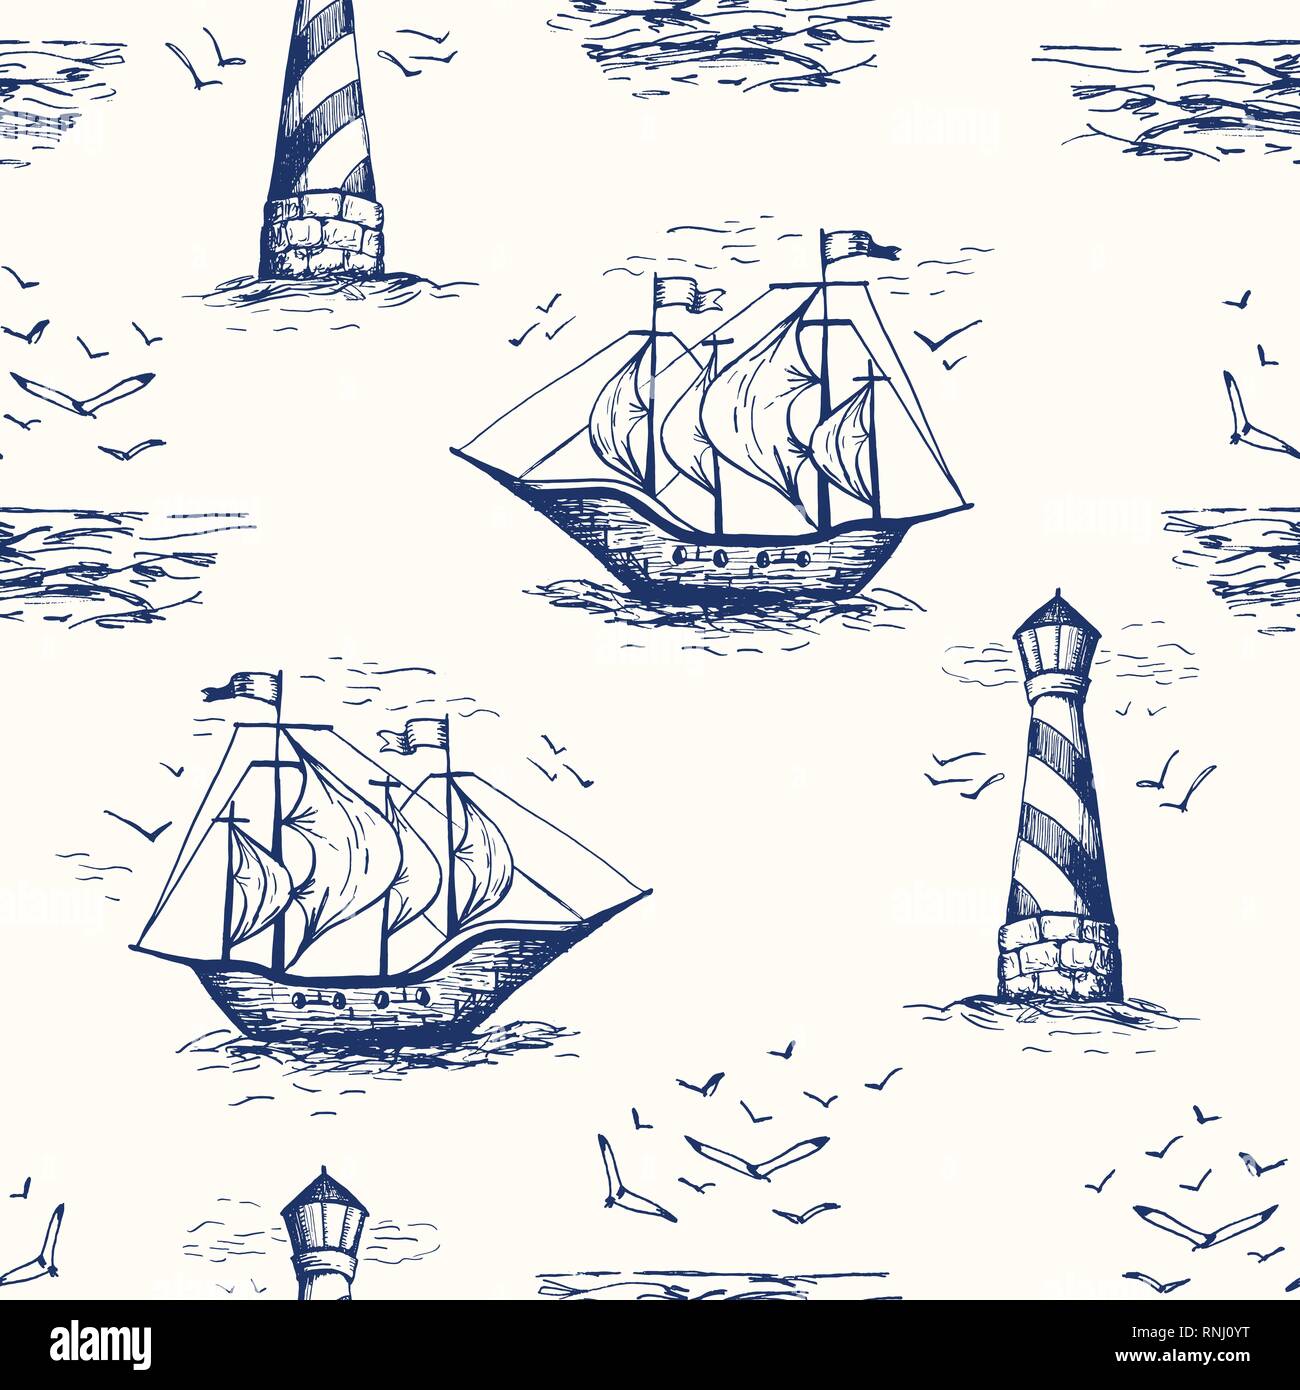 Vintage Hand-Drawn Nautical Toile De Jouy Vector Seamless Pattern with Lighthouse, Seagulls, Seaside Scenery and Ships. Monochrome Blue Marine Backgro Stock Vector